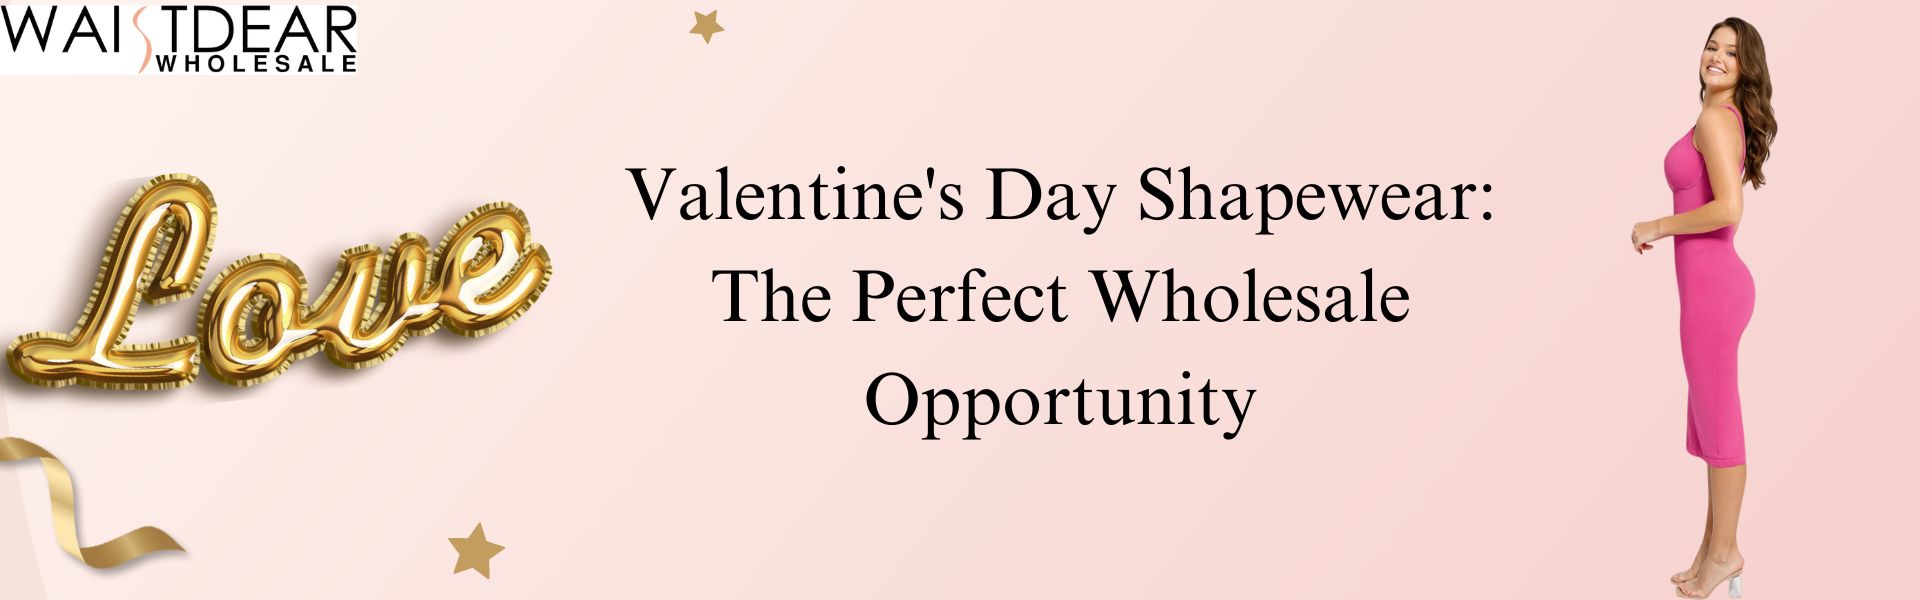 Valentine's Day Shapewear: The Perfect Wholesale Opportunity